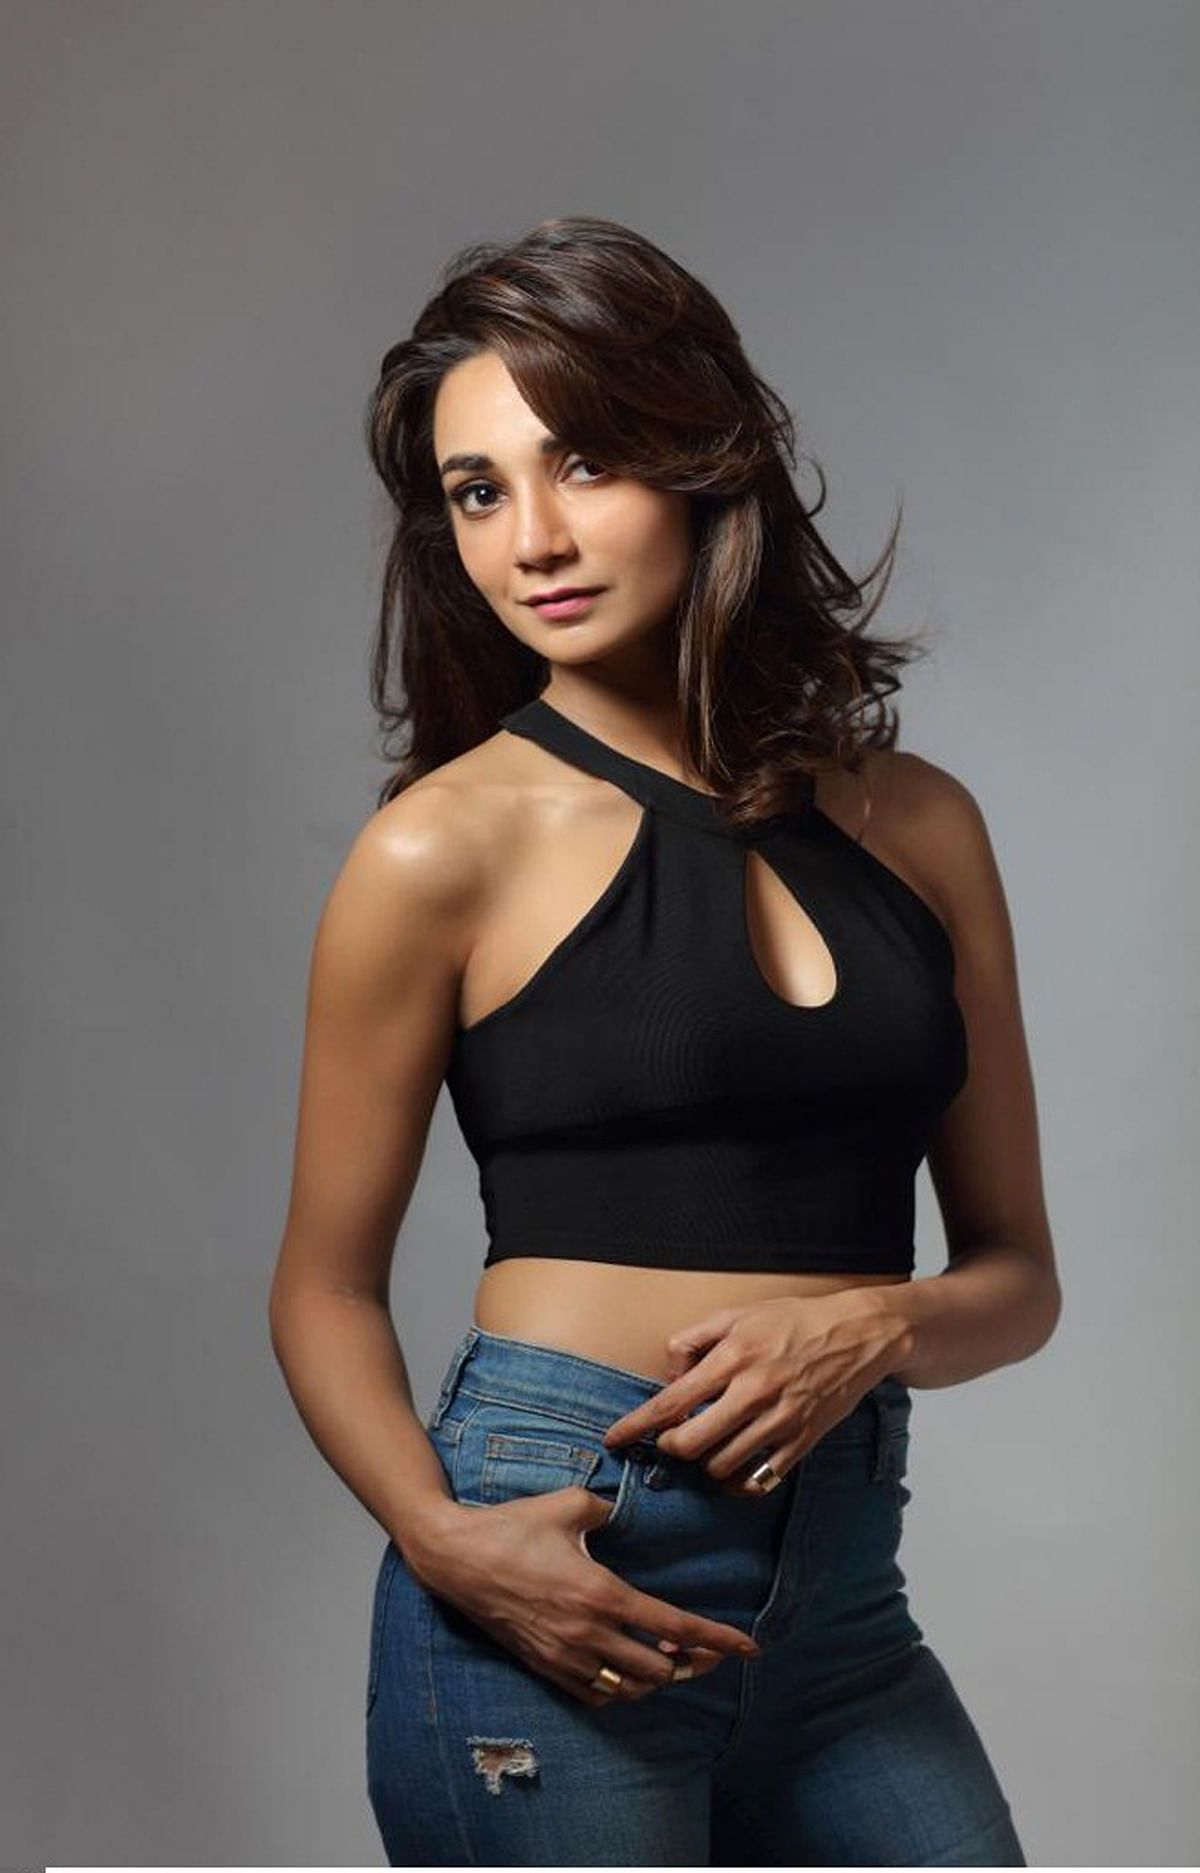 Theatre will always be my first love: Ira Dubey 